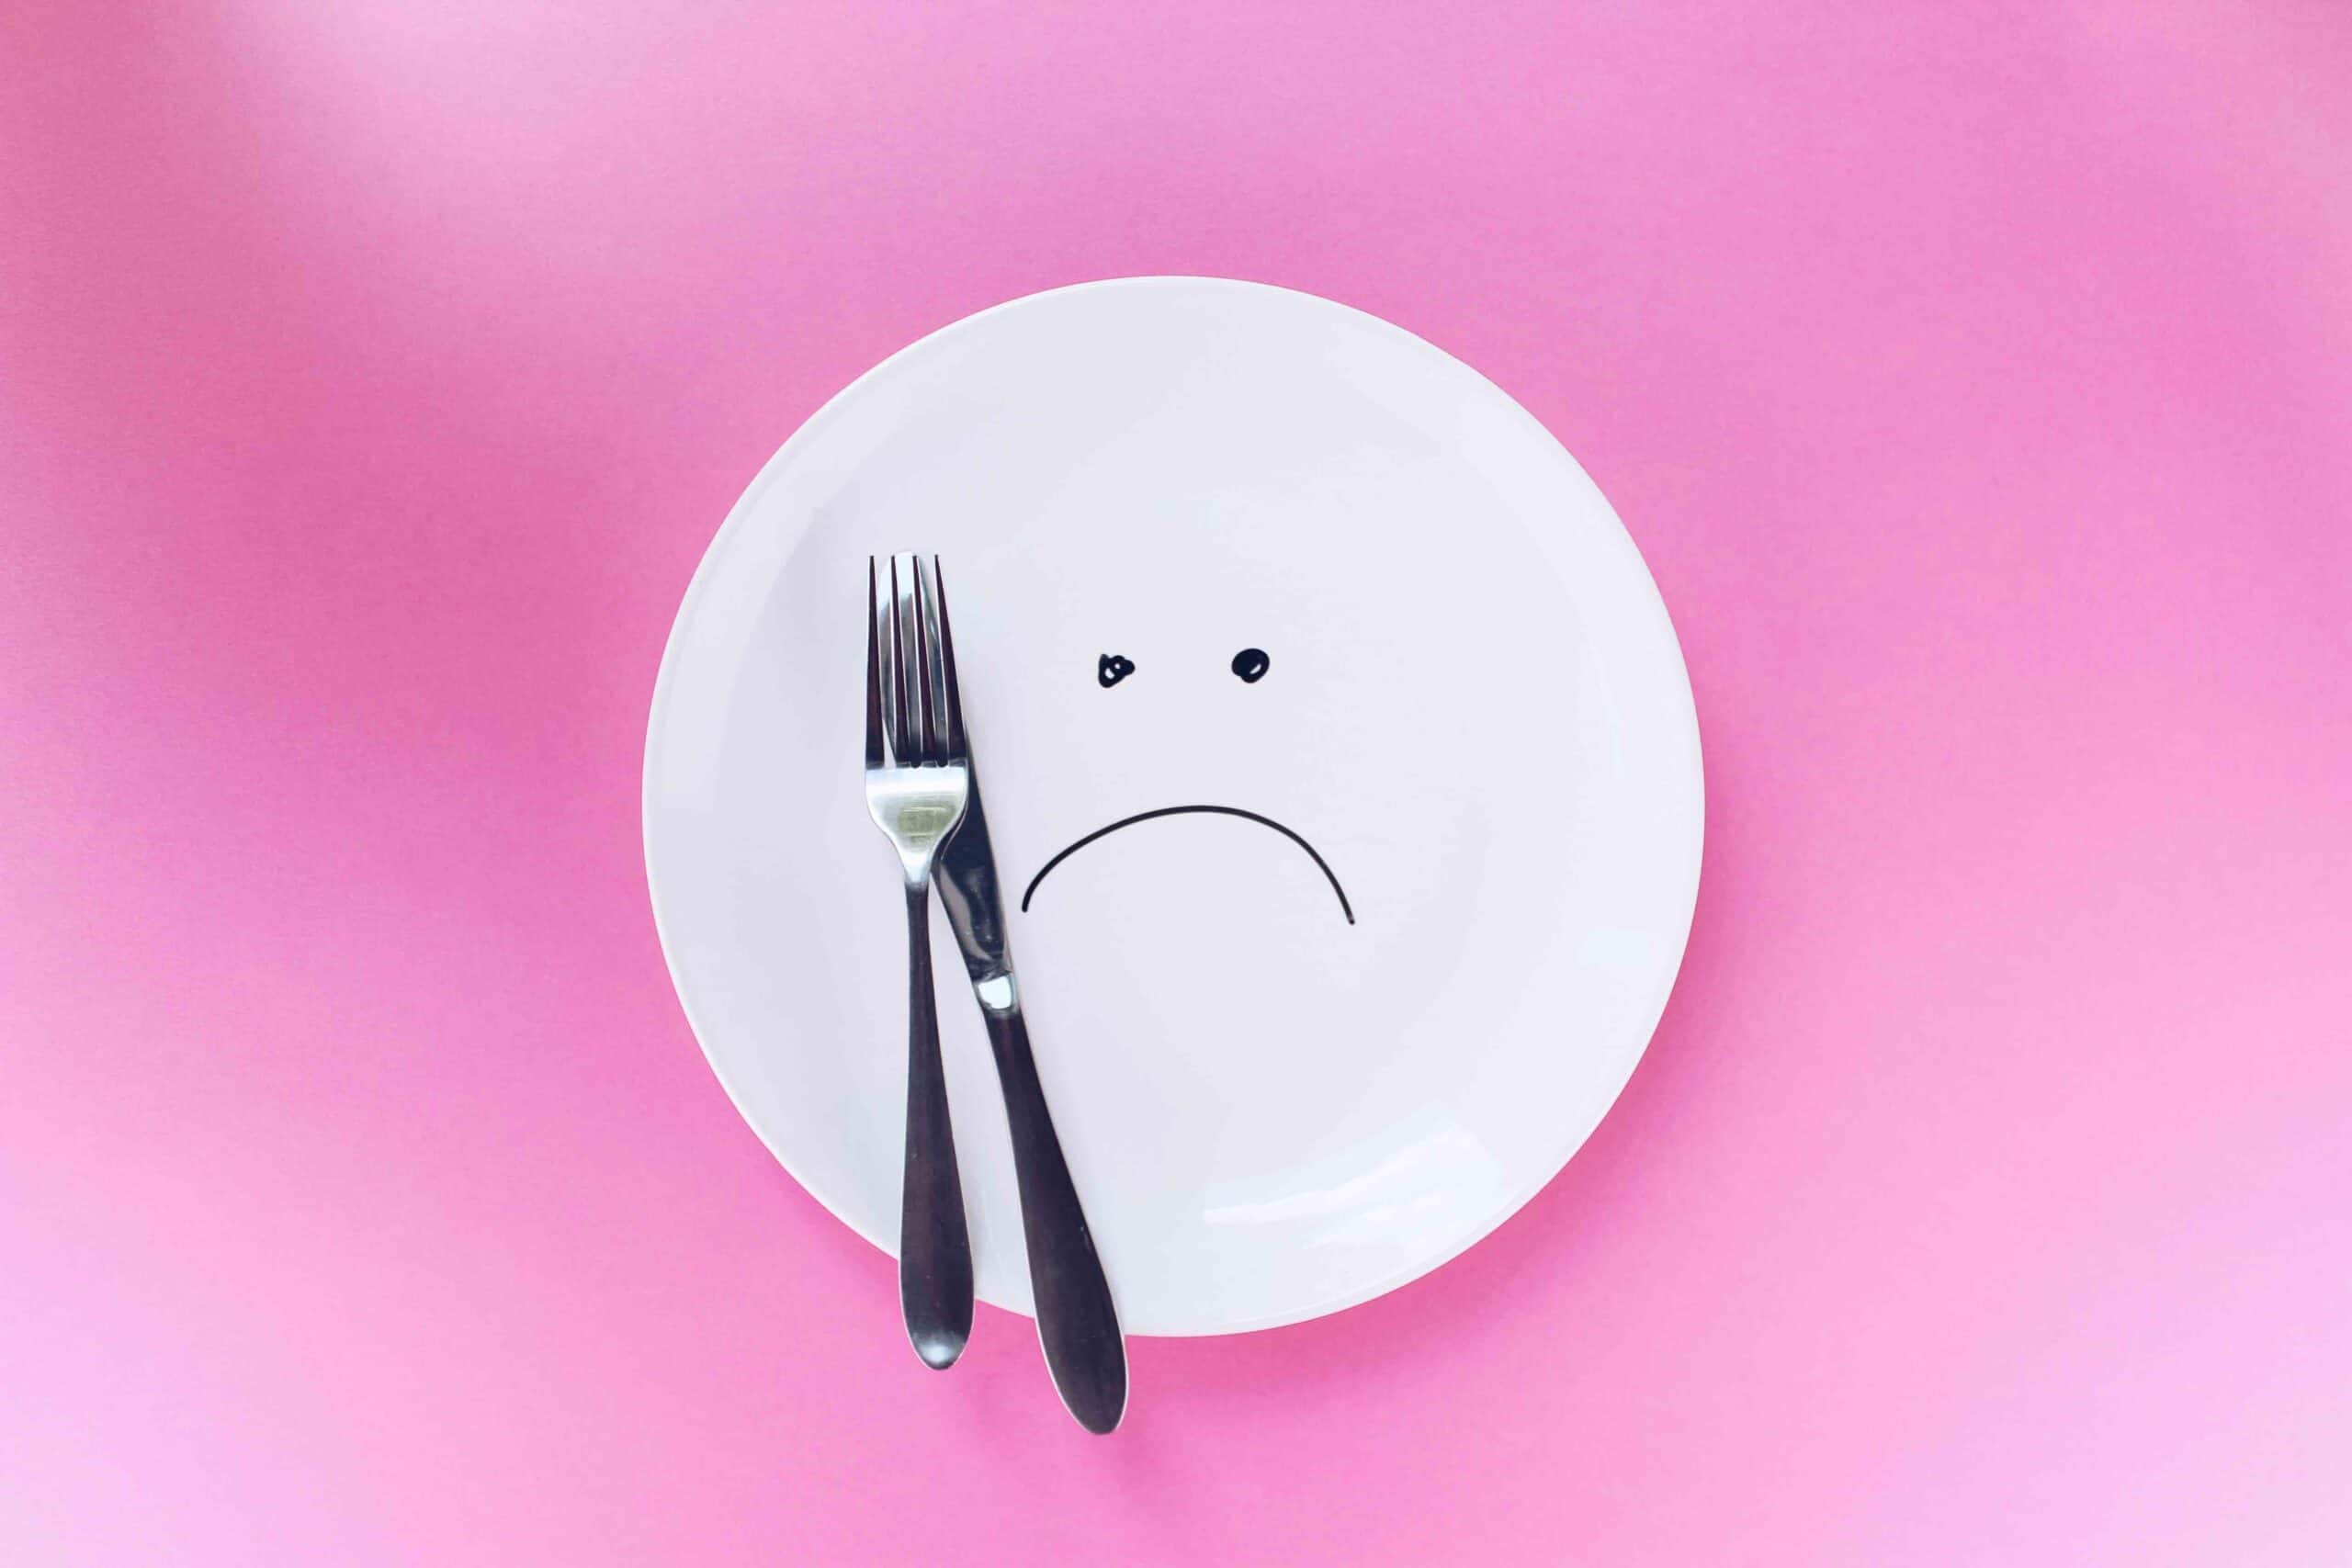 Frownie face on a plate diet failure